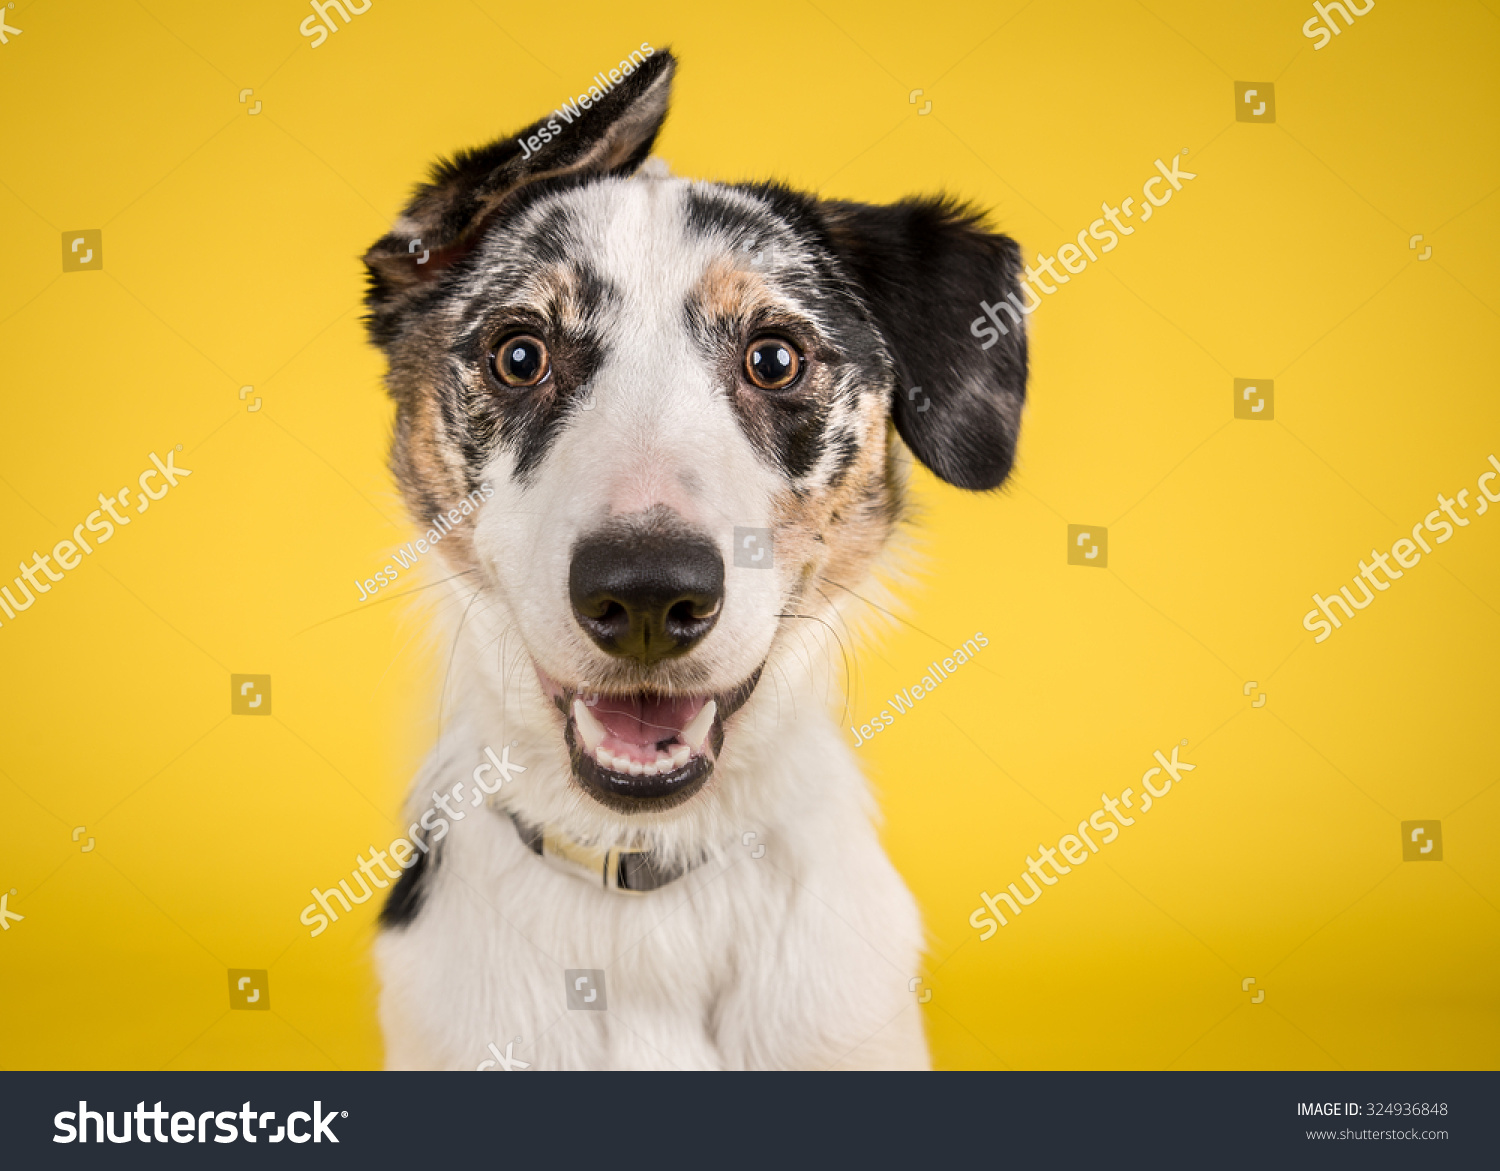 Cute, happy dog headshot smiling on a bright, vibrant yellow background #324936848